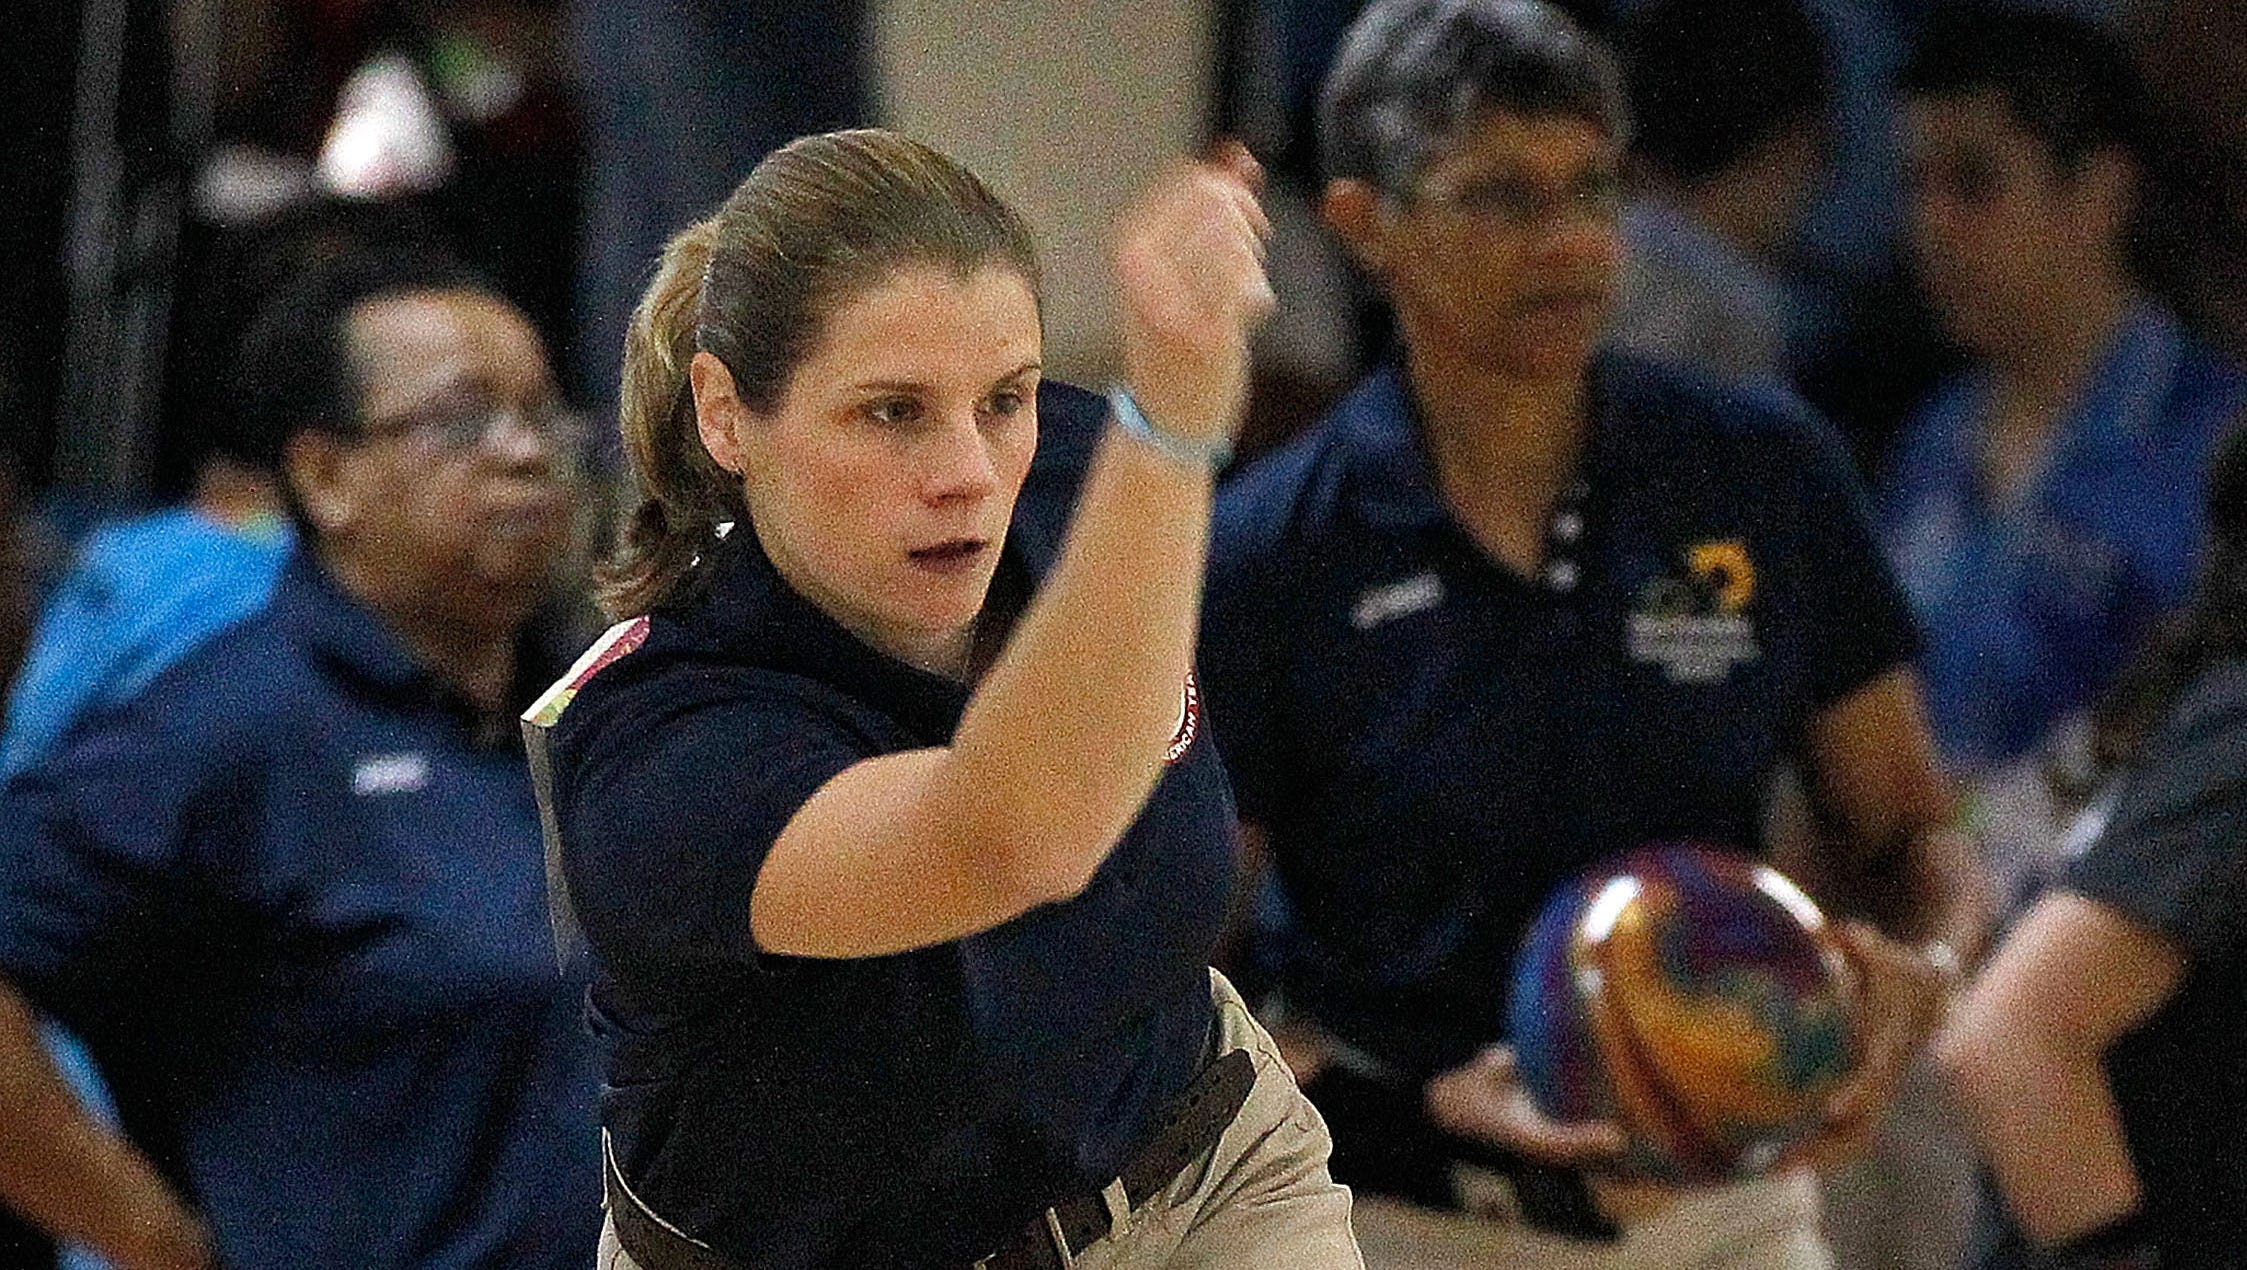 Top women bowlers in town for USBC Queens